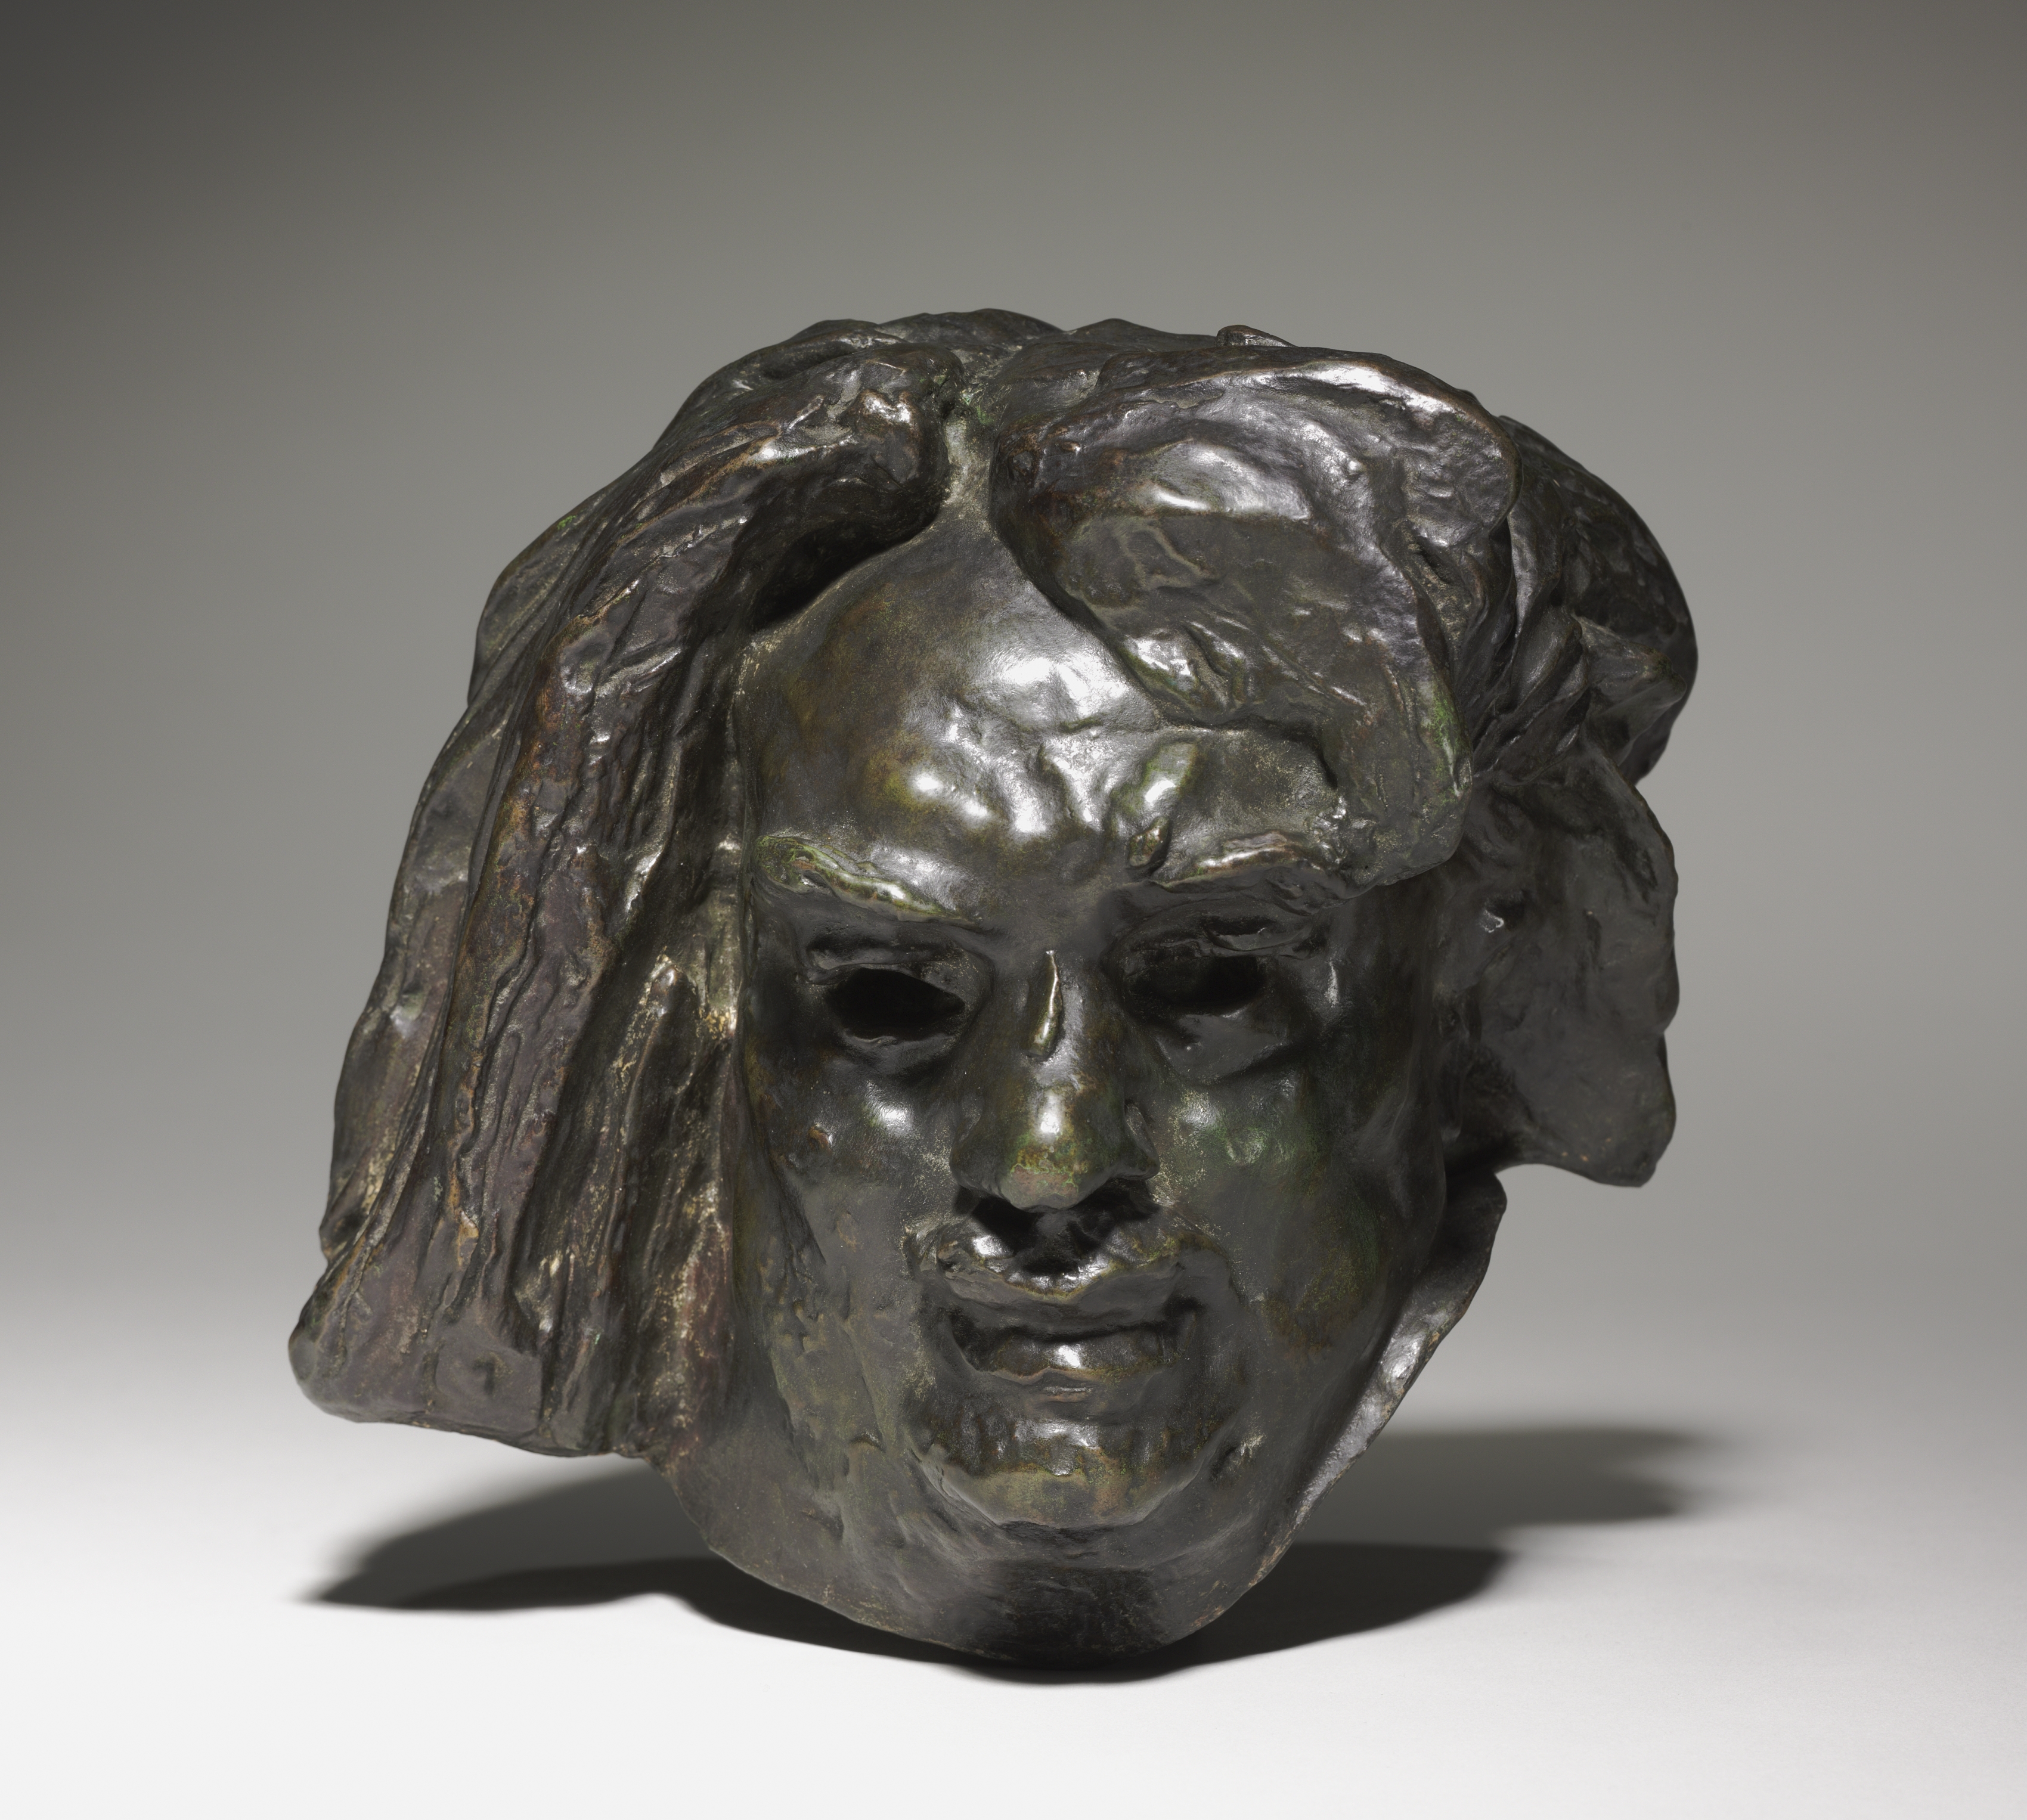 Study for the Head of the Monument to Honoré de Balzac